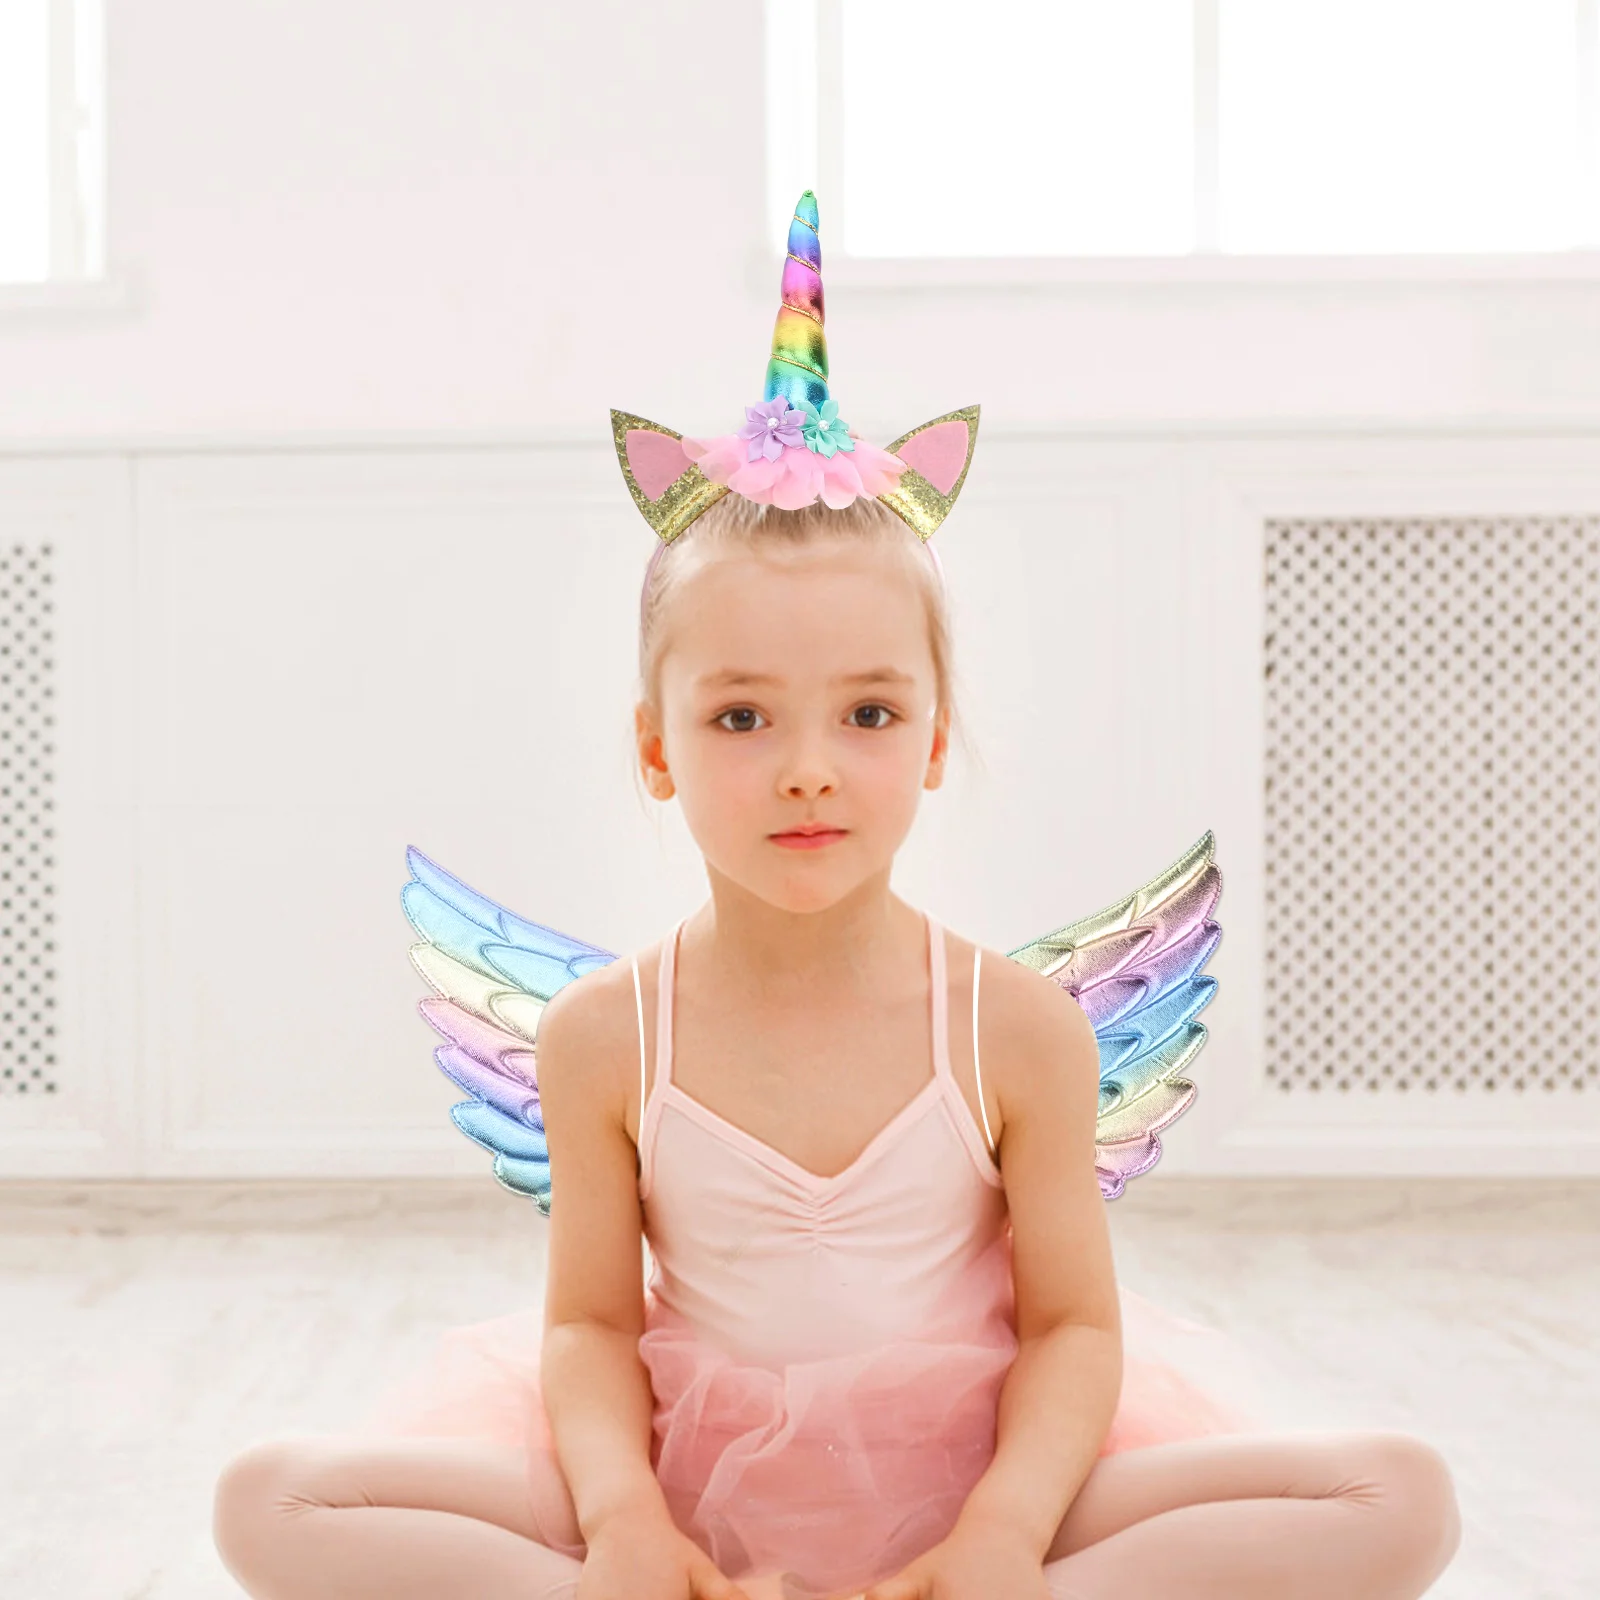 

Christmas Angel Wing And Hair Dress Outfit For Kids Birthday Party Costume Stage Performance(Headband, Random Pattern)